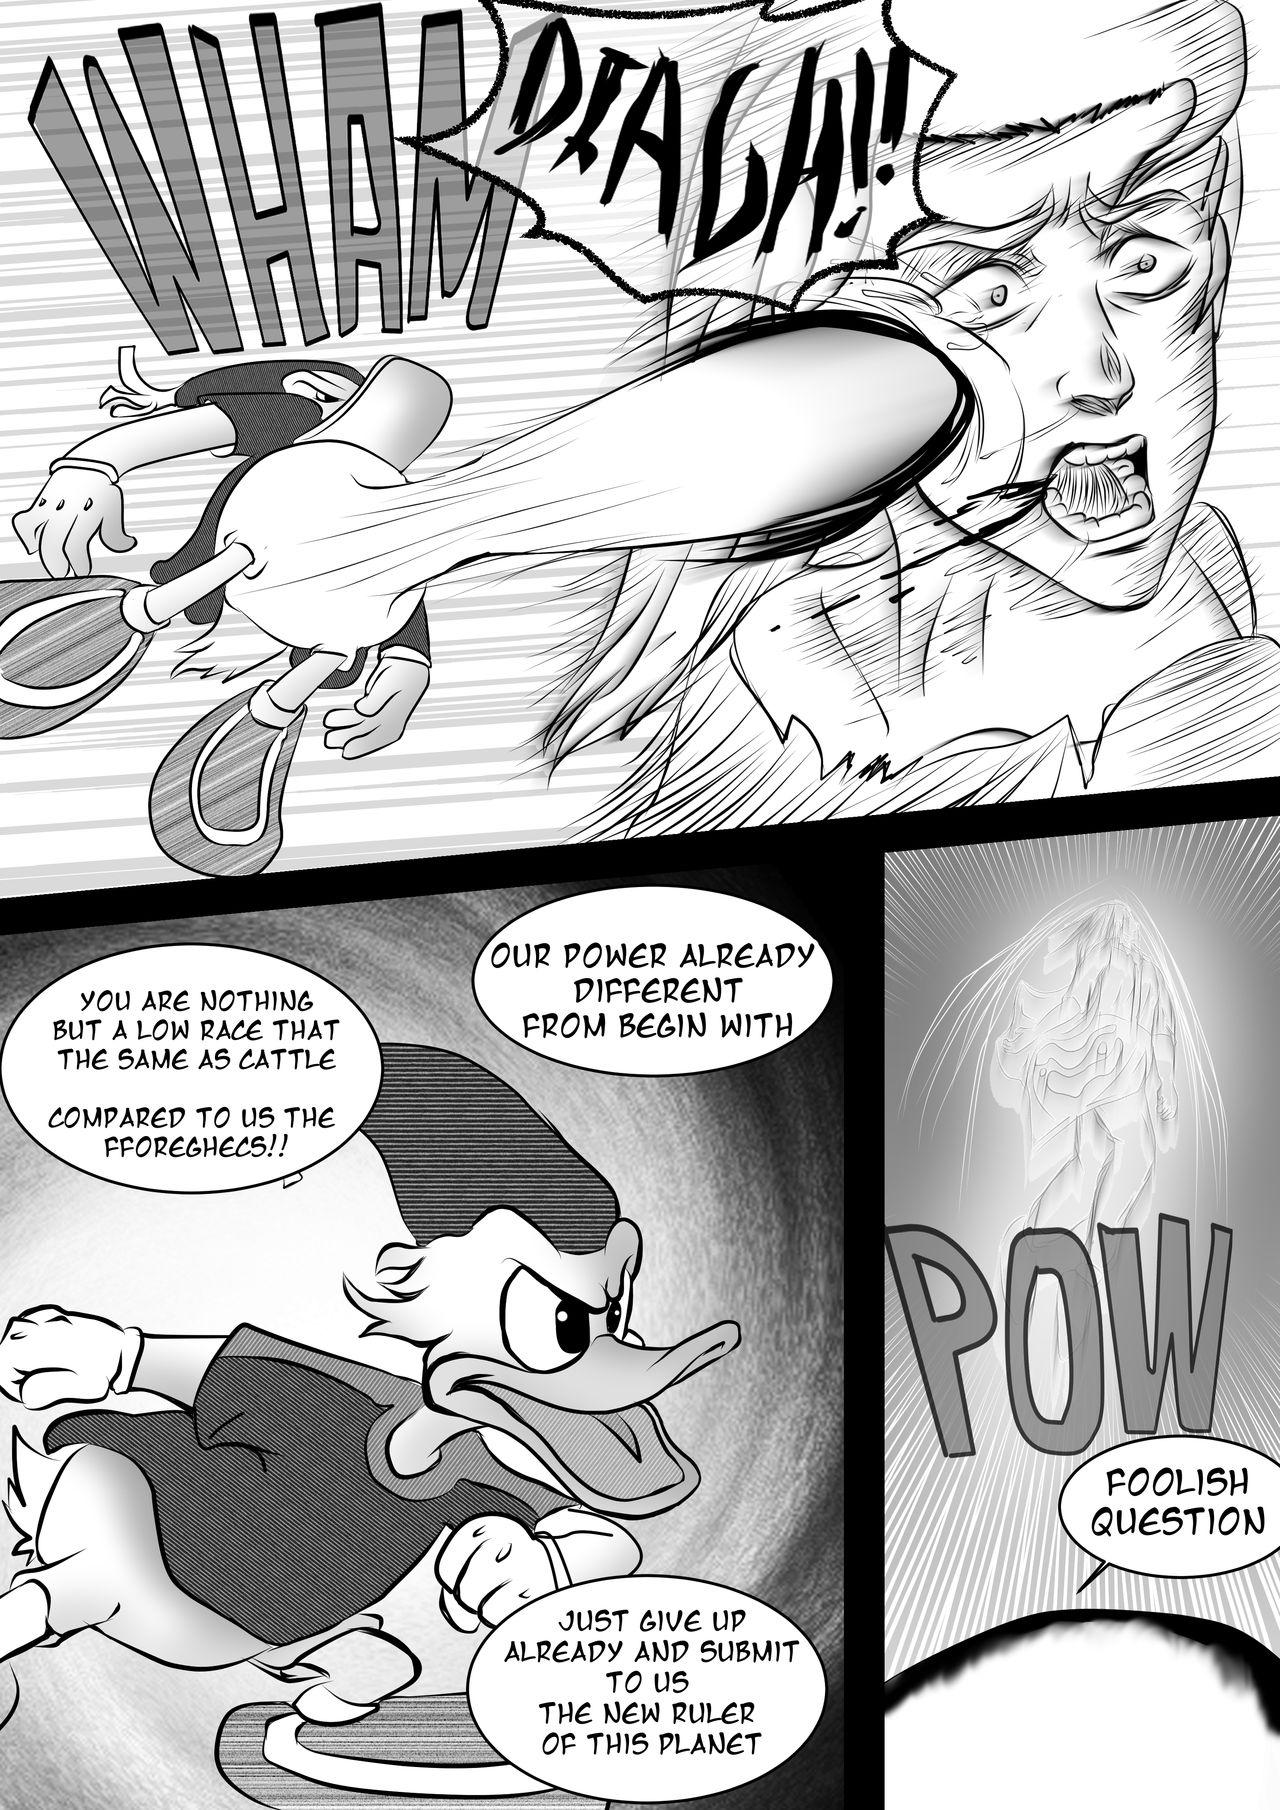 Piroca The Gorgeous Meat - Original Curious - Page 11